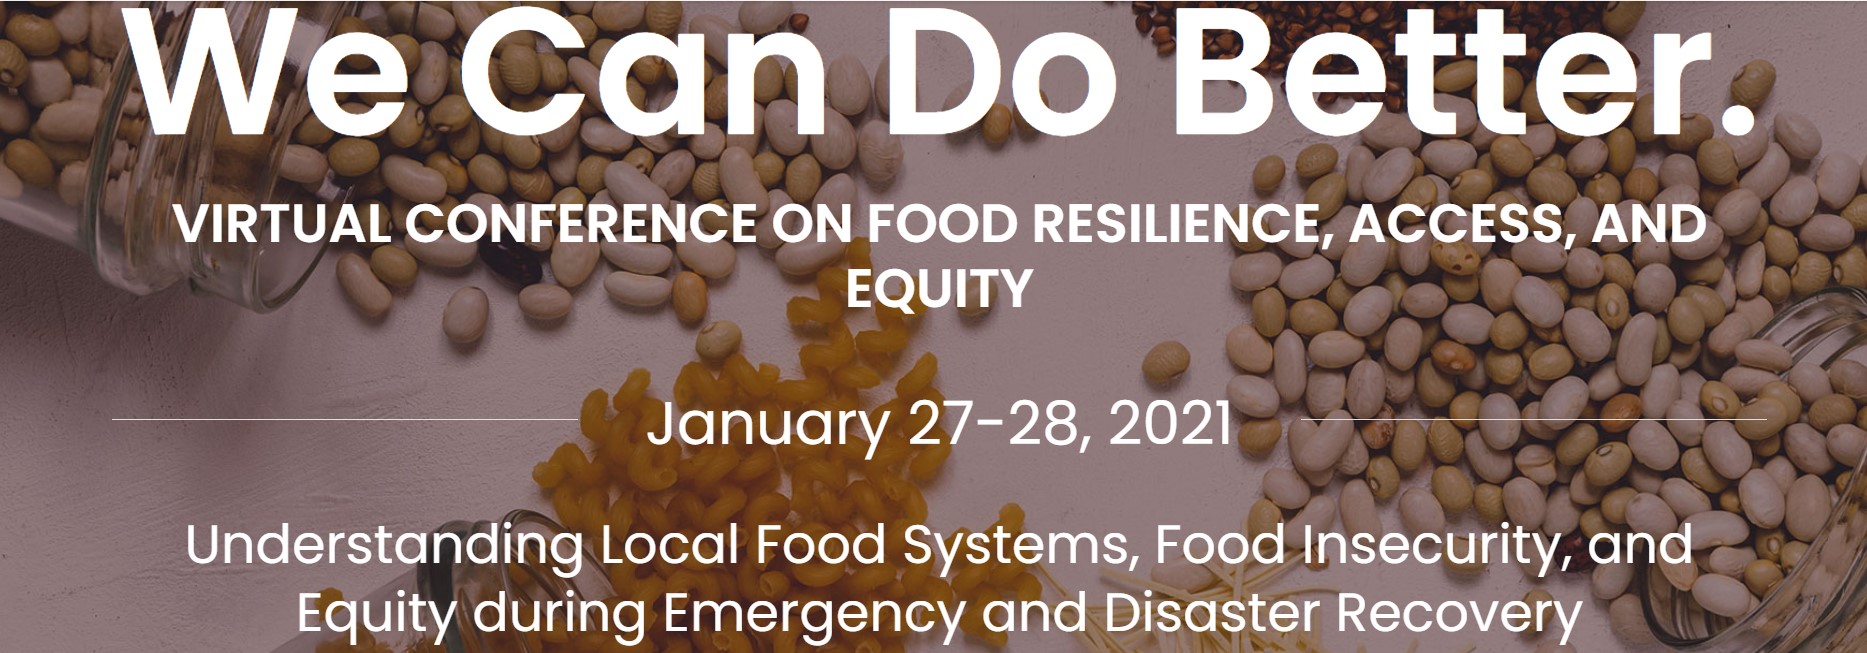 Food Resilience Conference